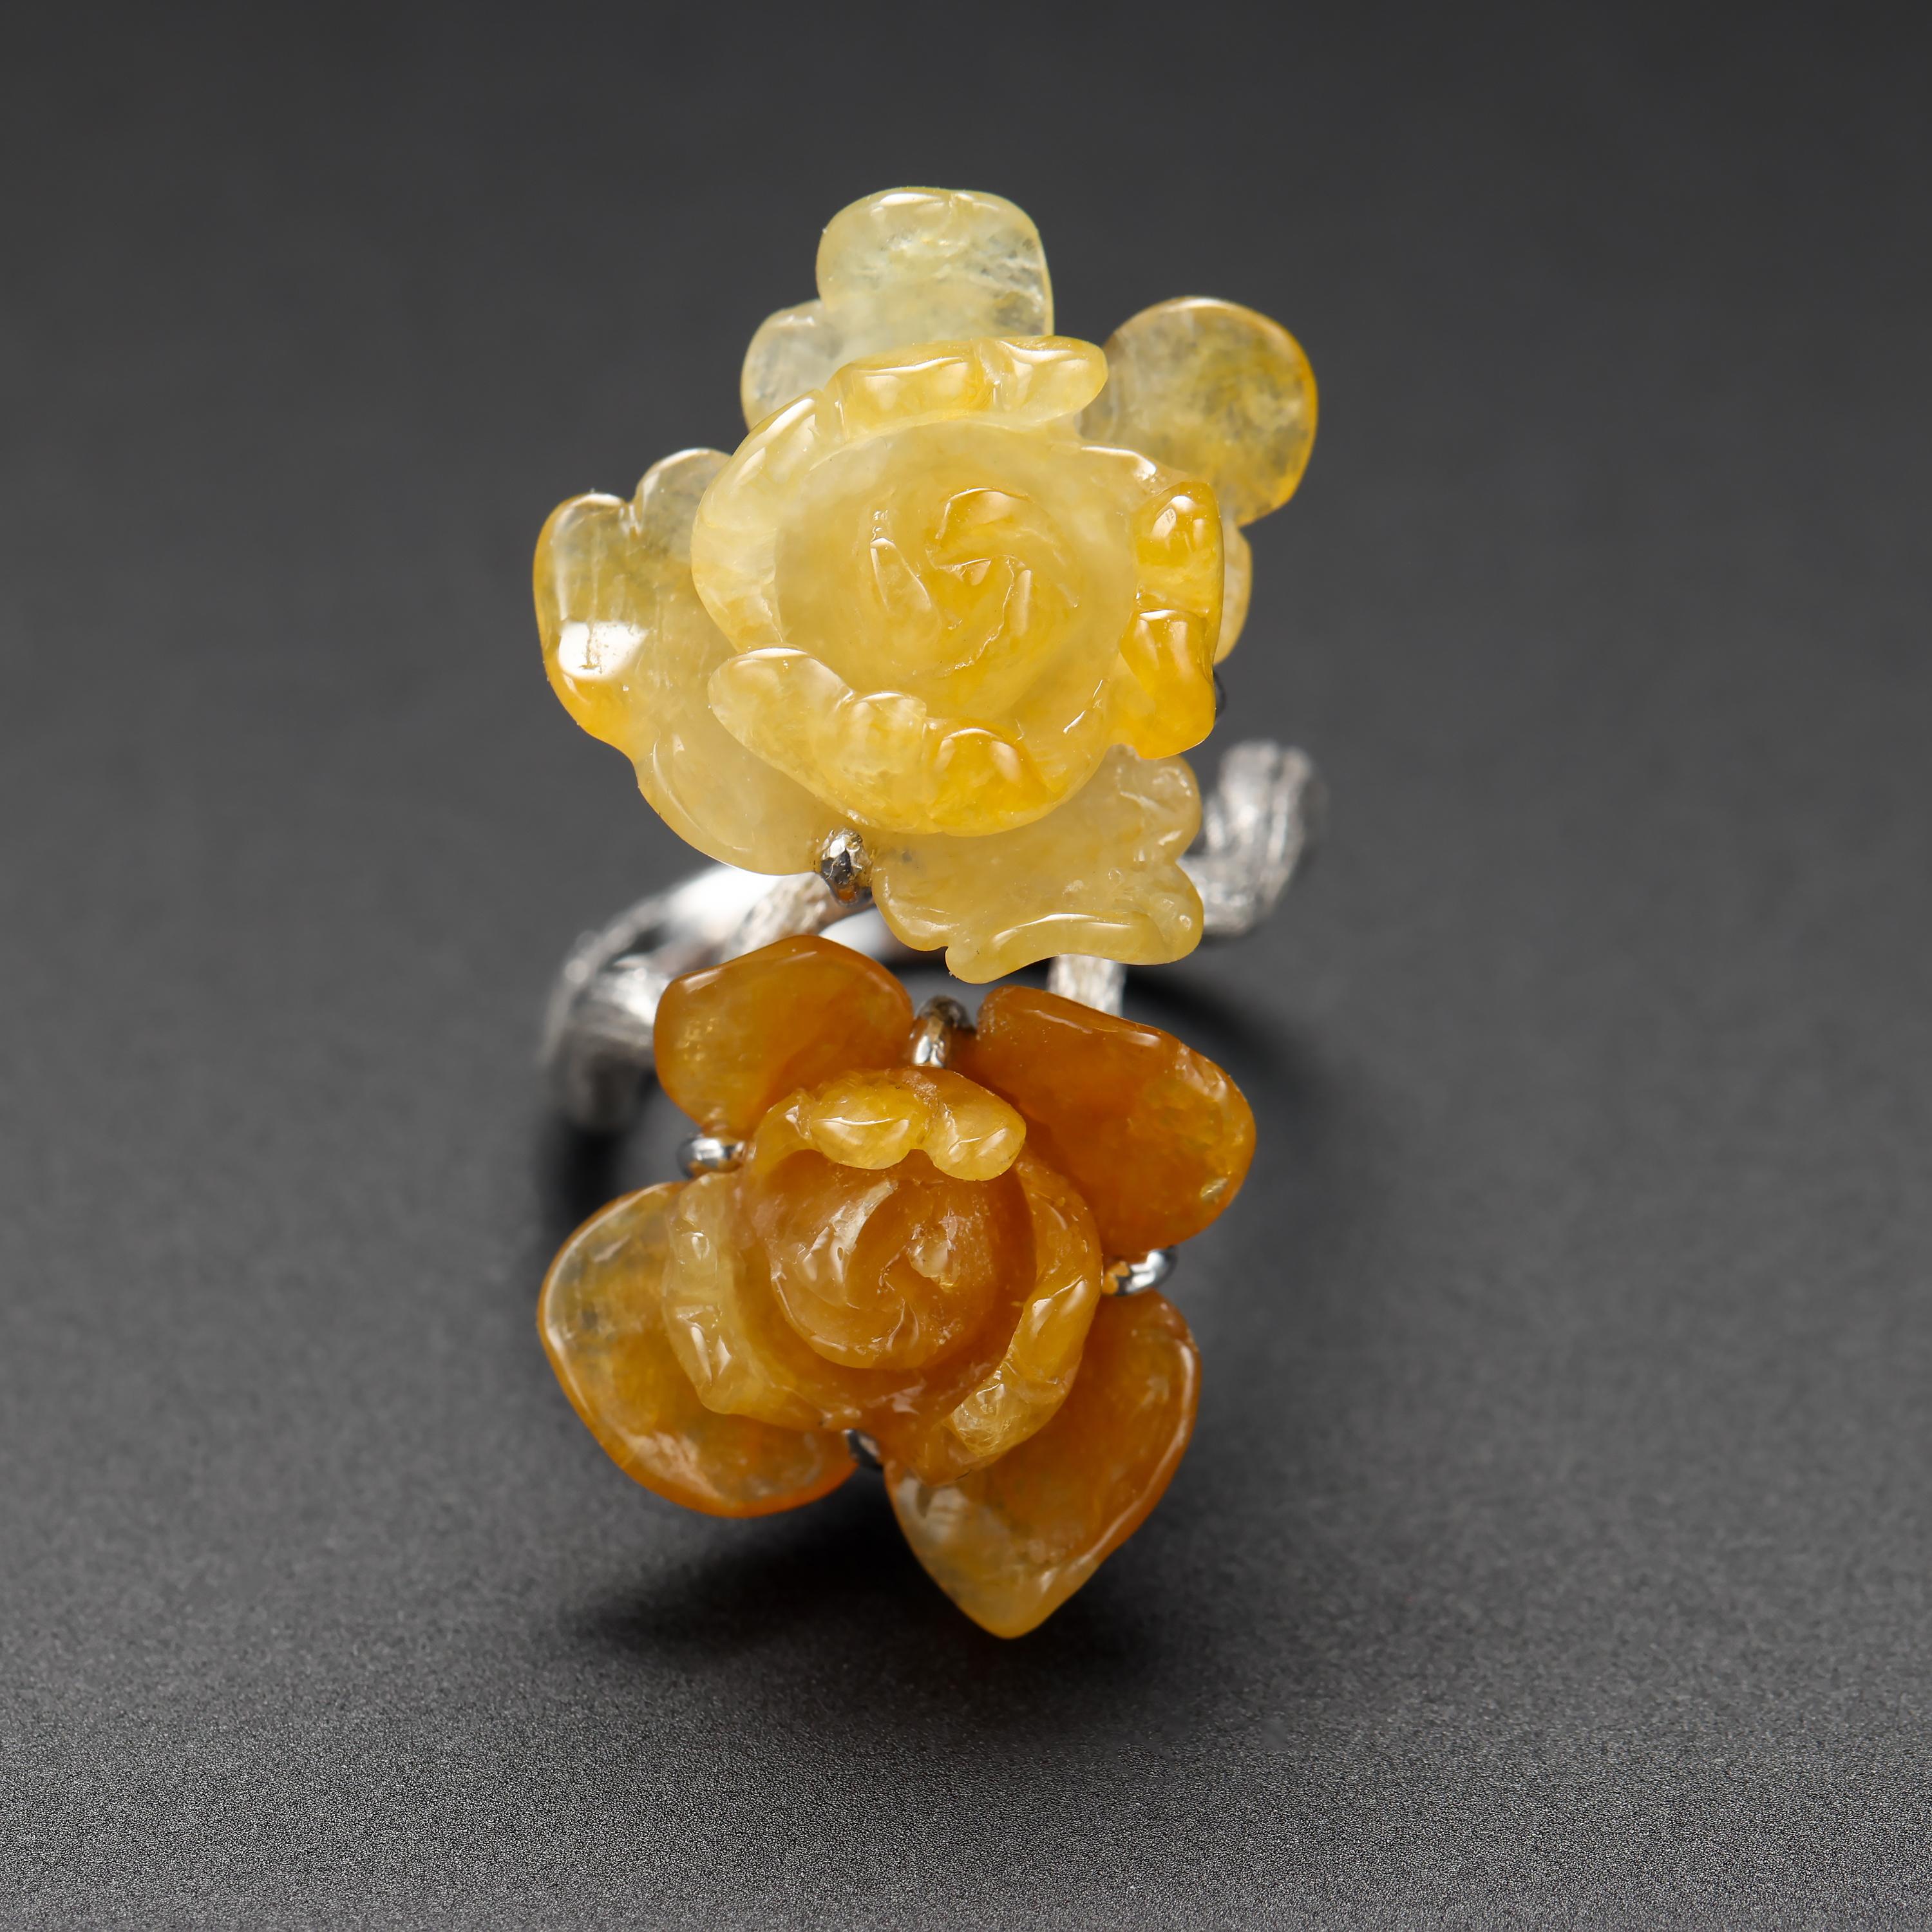 A pair of languid flower blossoms glowing in tropical heat—one orangy-yellow, one lighter yellow, both clearly carved from the same section of stone— are gripped tight by sturdy prongs in a dense, sturdy 18K white gold mounting of cast construction